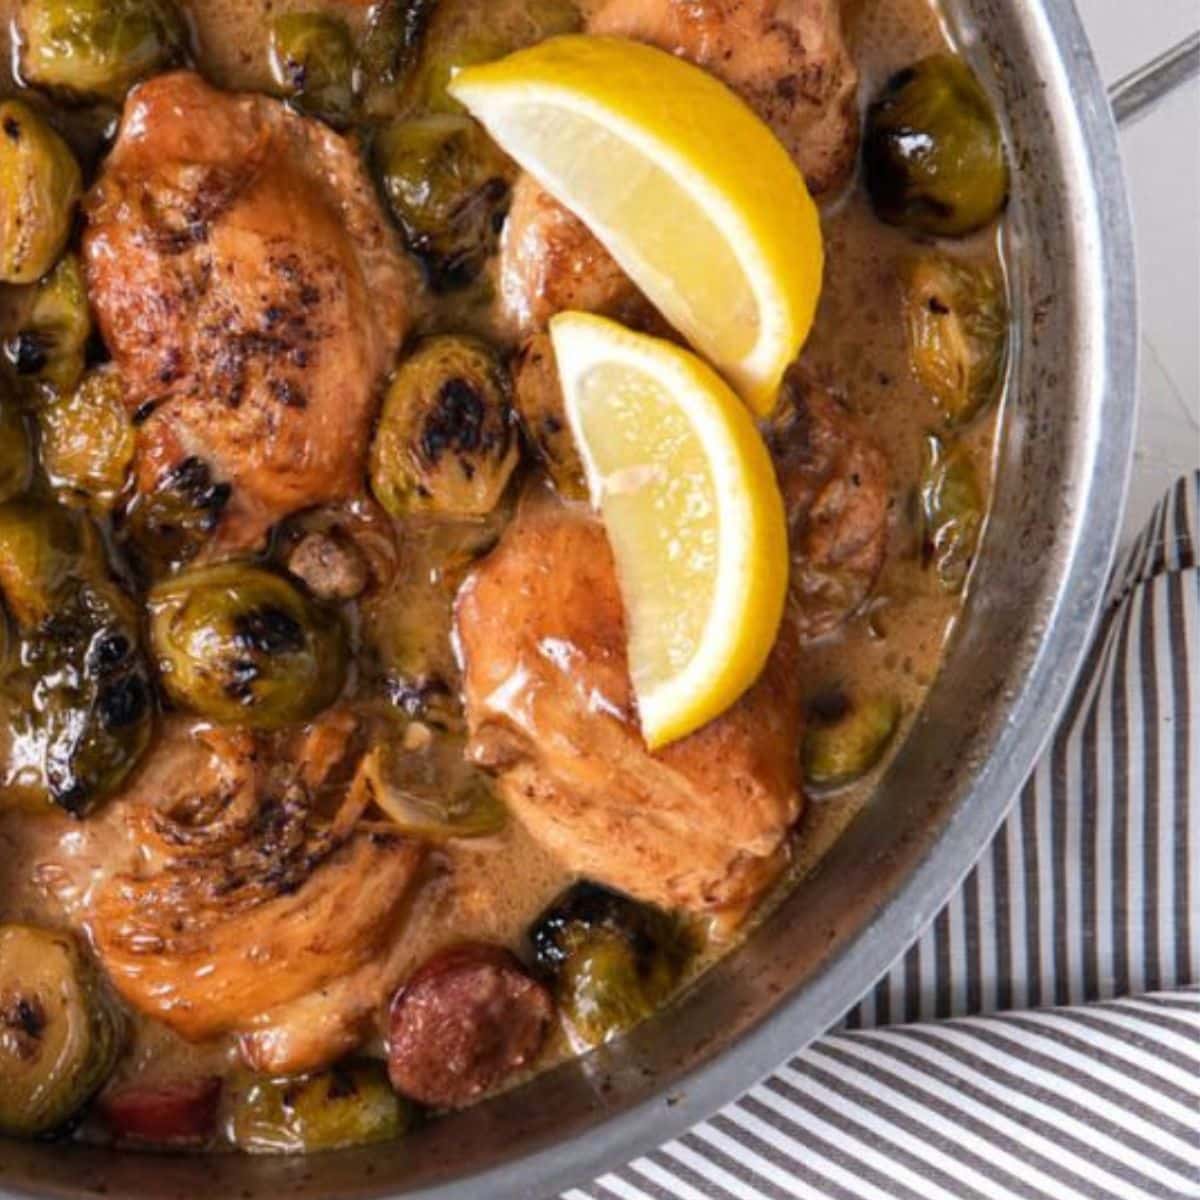 Coq Au Vin with Brussels Sprouts